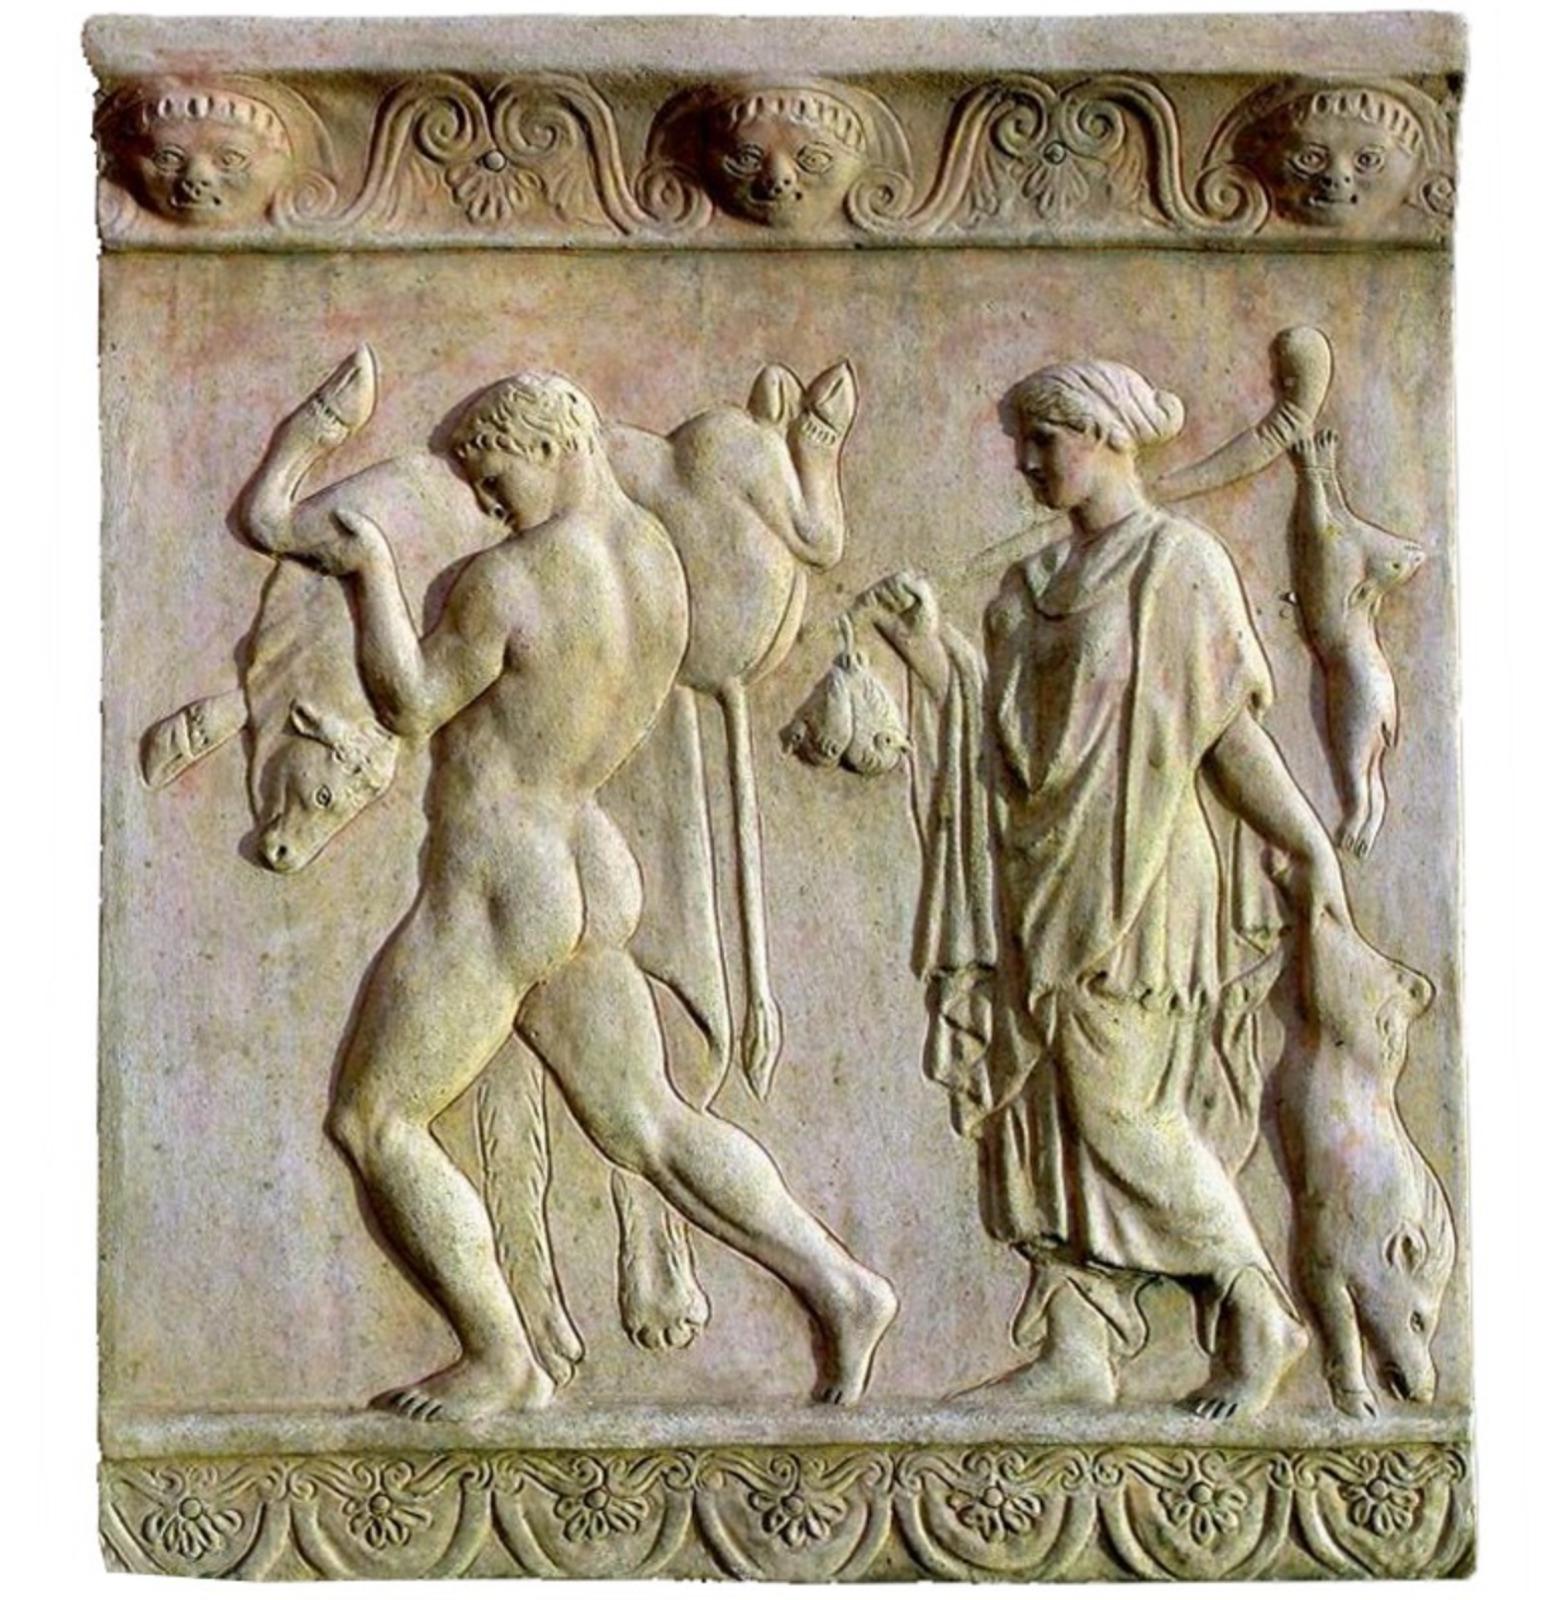 TERRACOTTA BAS RELIEF HERCULES LABORS GREEK ROMAN early 20th Century
Bas-relief - Hercules, Impruneta terracotta
HEIGHT 55cm
WIDTH 49cms
THICKNESS 3cm
WEIGHT 15Kg
MATERIAL Terracotta
good conditions.